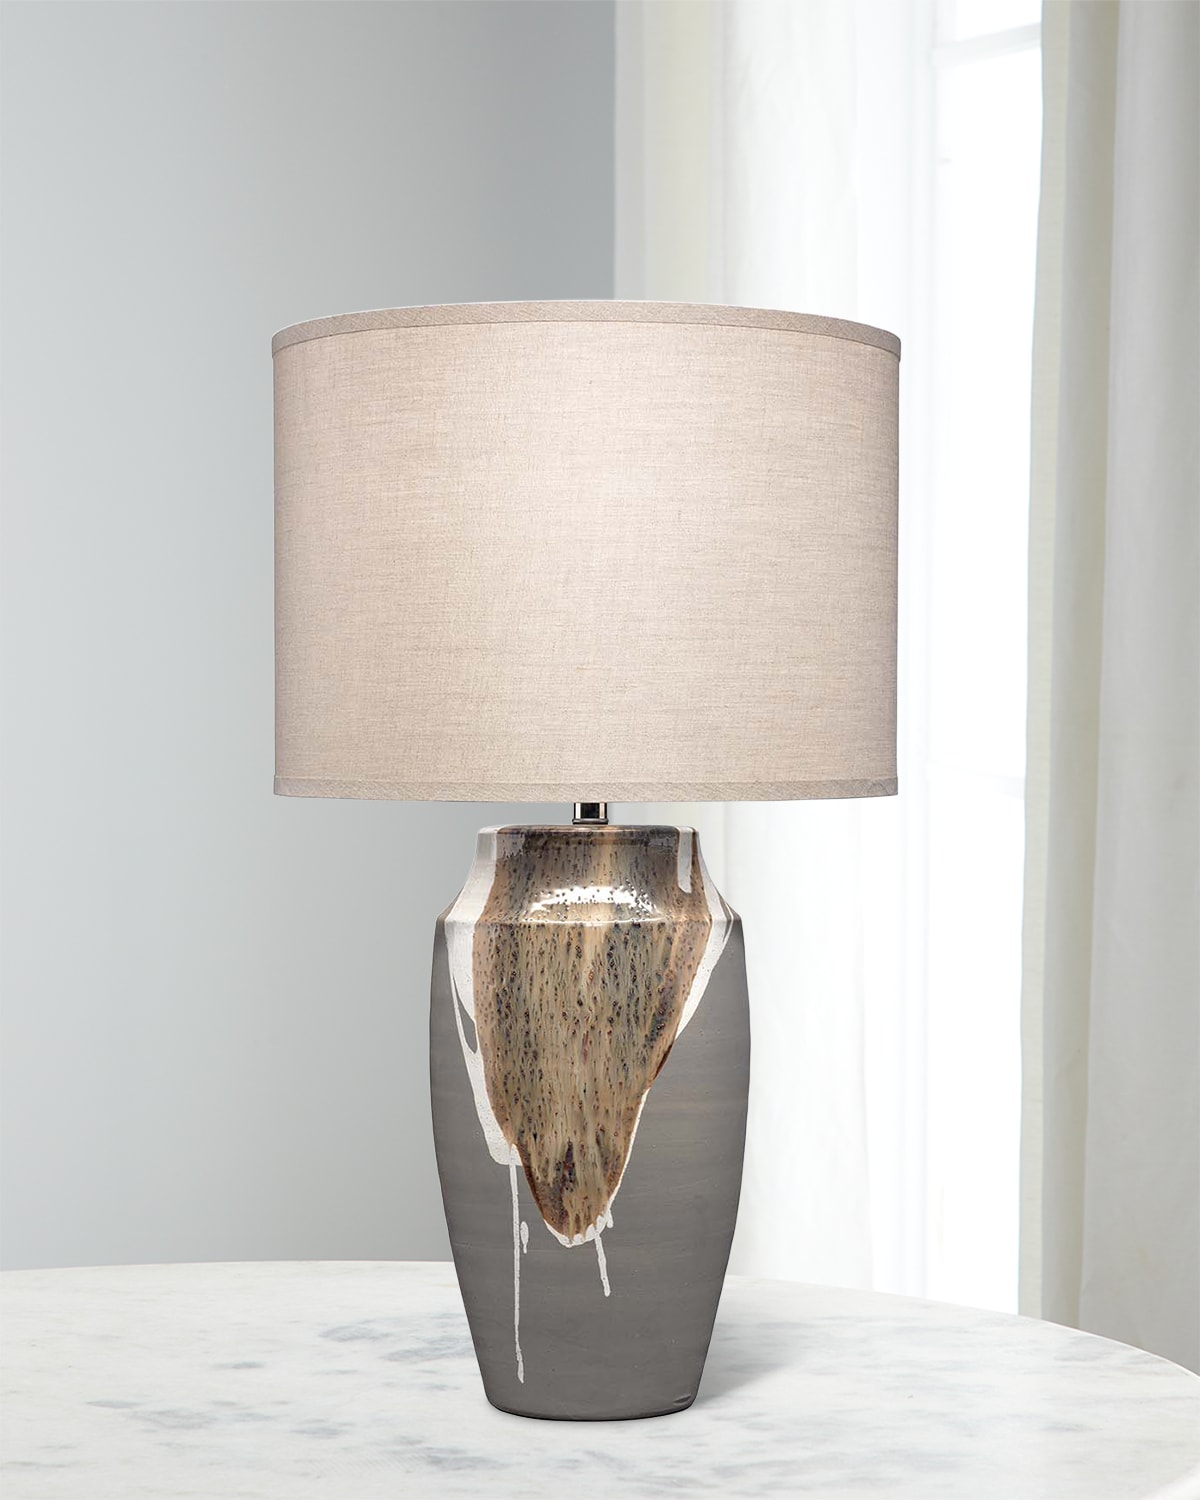 KW3012QAB by Visual Comfort - Halcyon Accent Table Lamp in Quartz